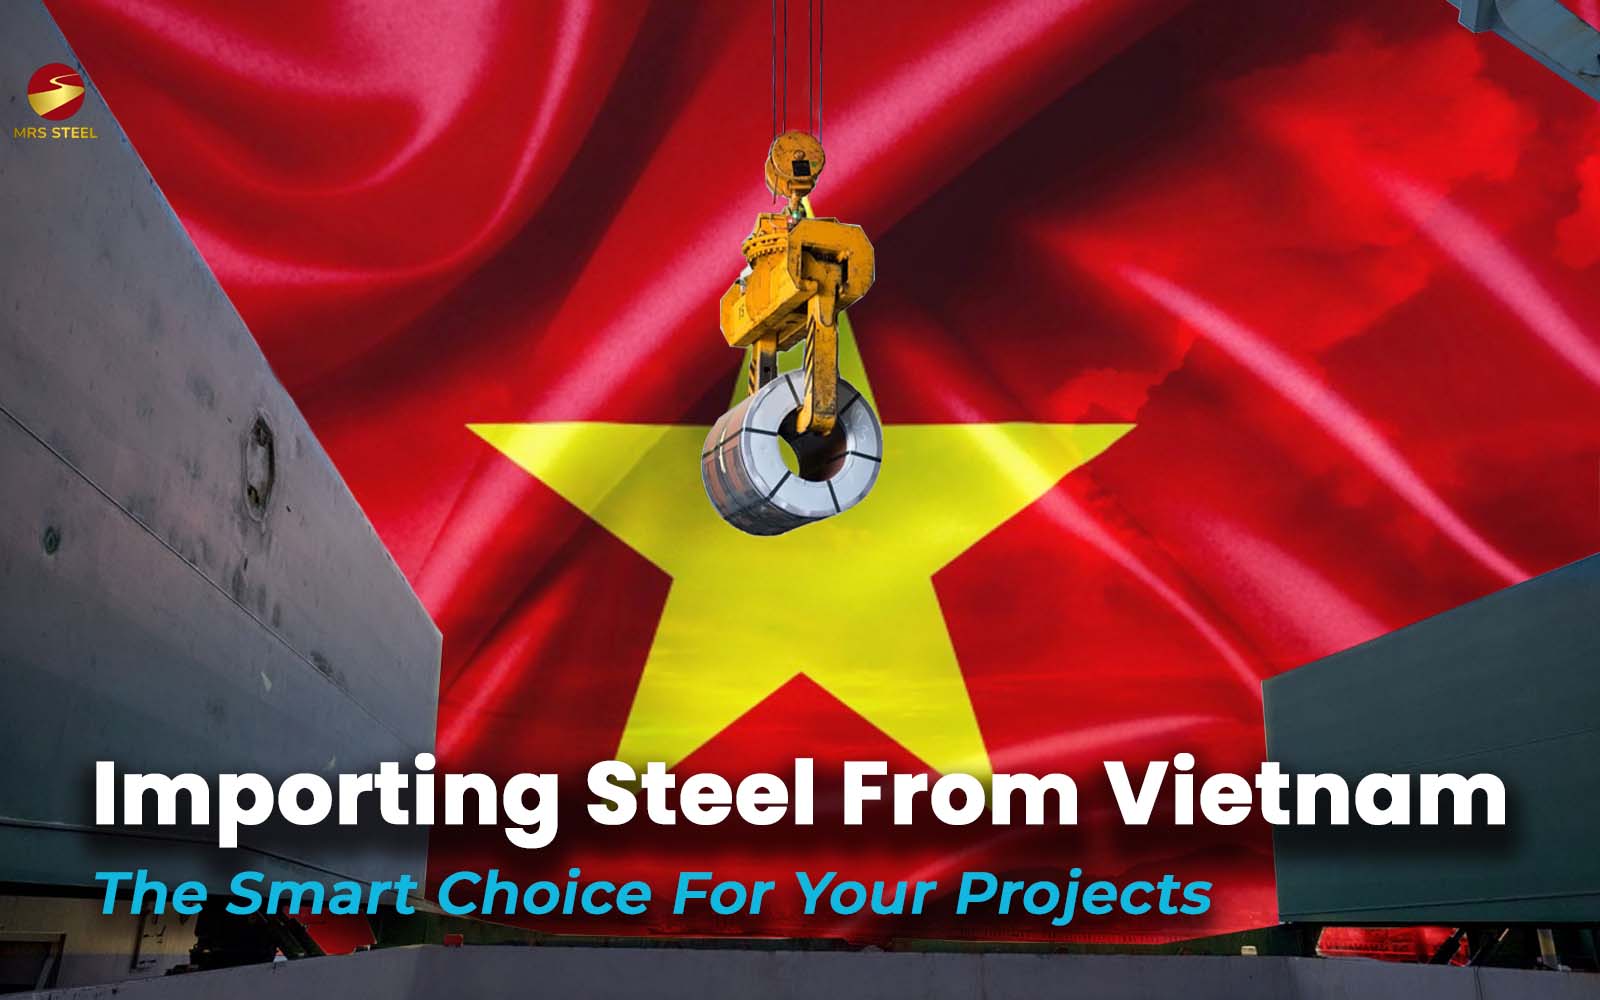 Importing steel from Vietnam - The smart choice for your project